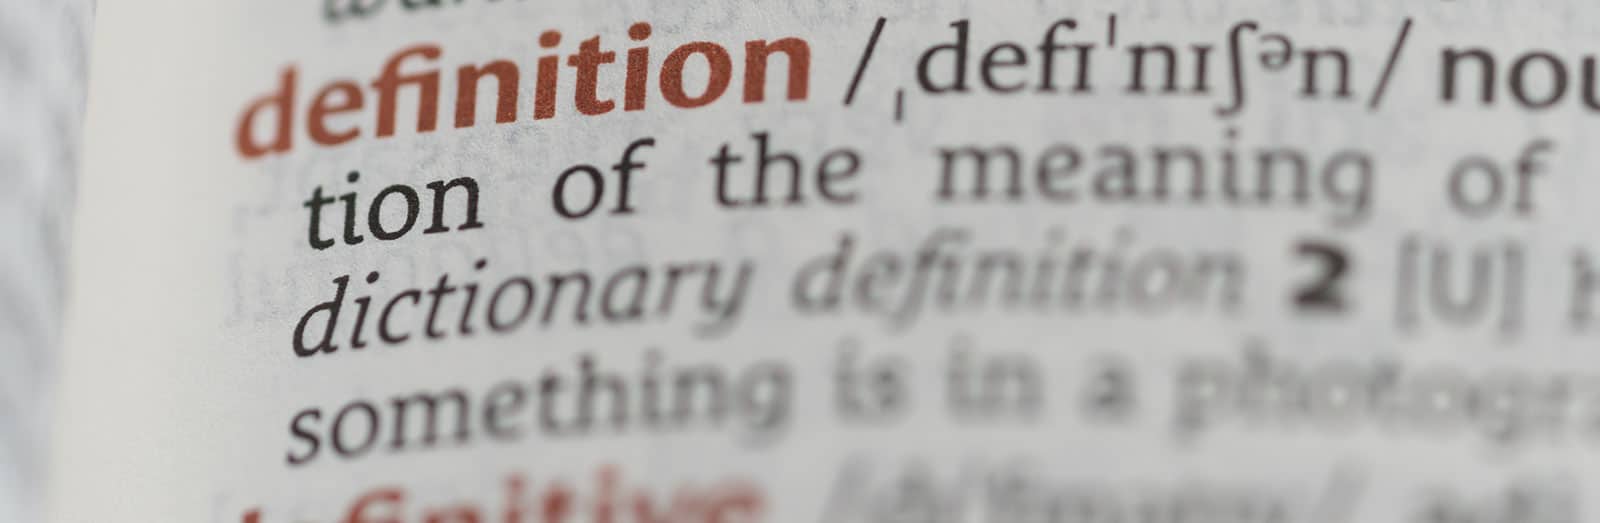 Google Search Gets Improved Dictionary Definitions With Sample